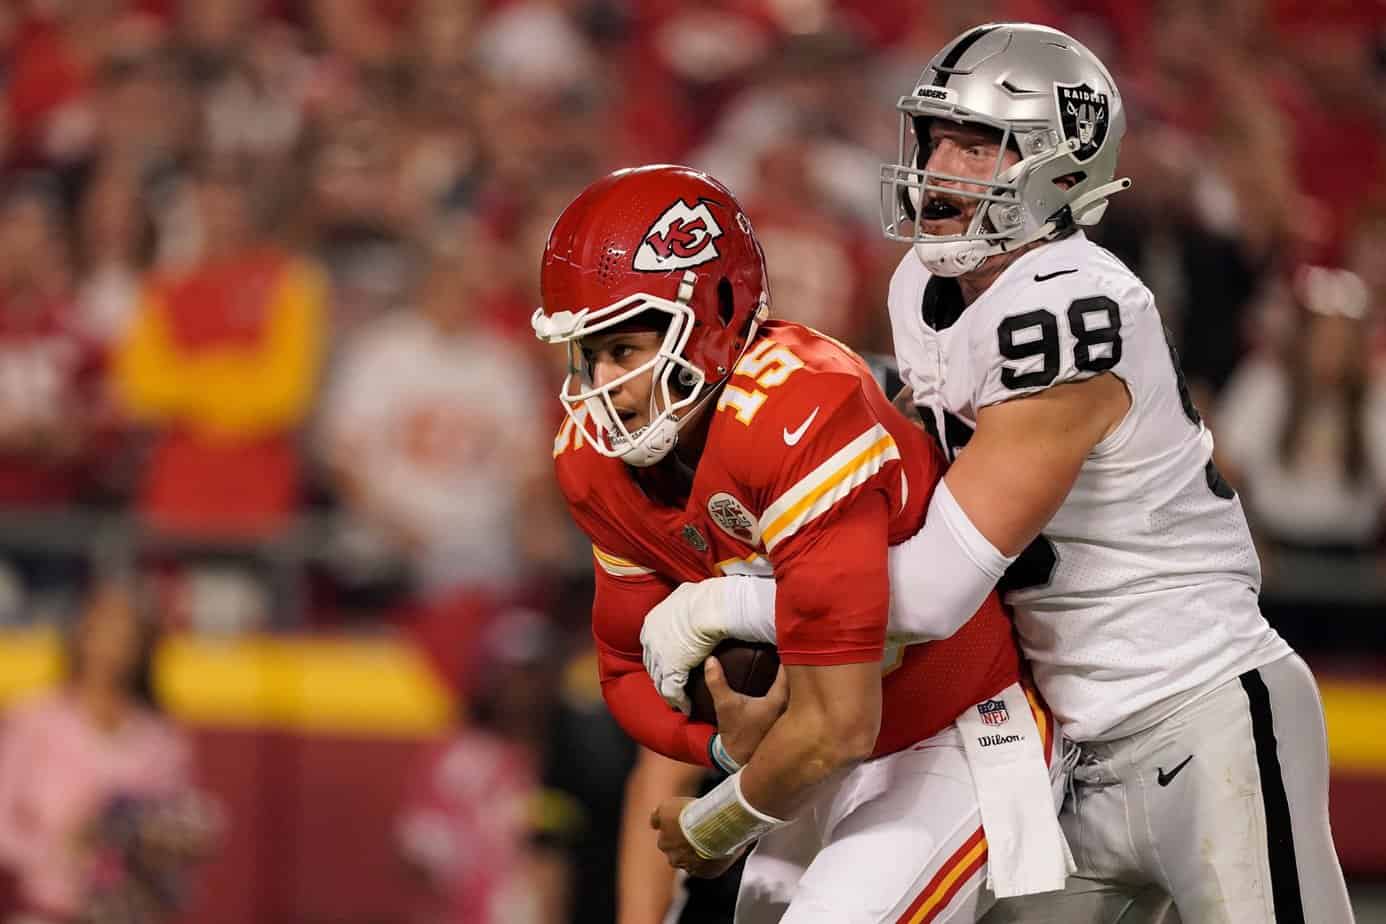 Raiders vs. Chiefs Preview and Betting Odds